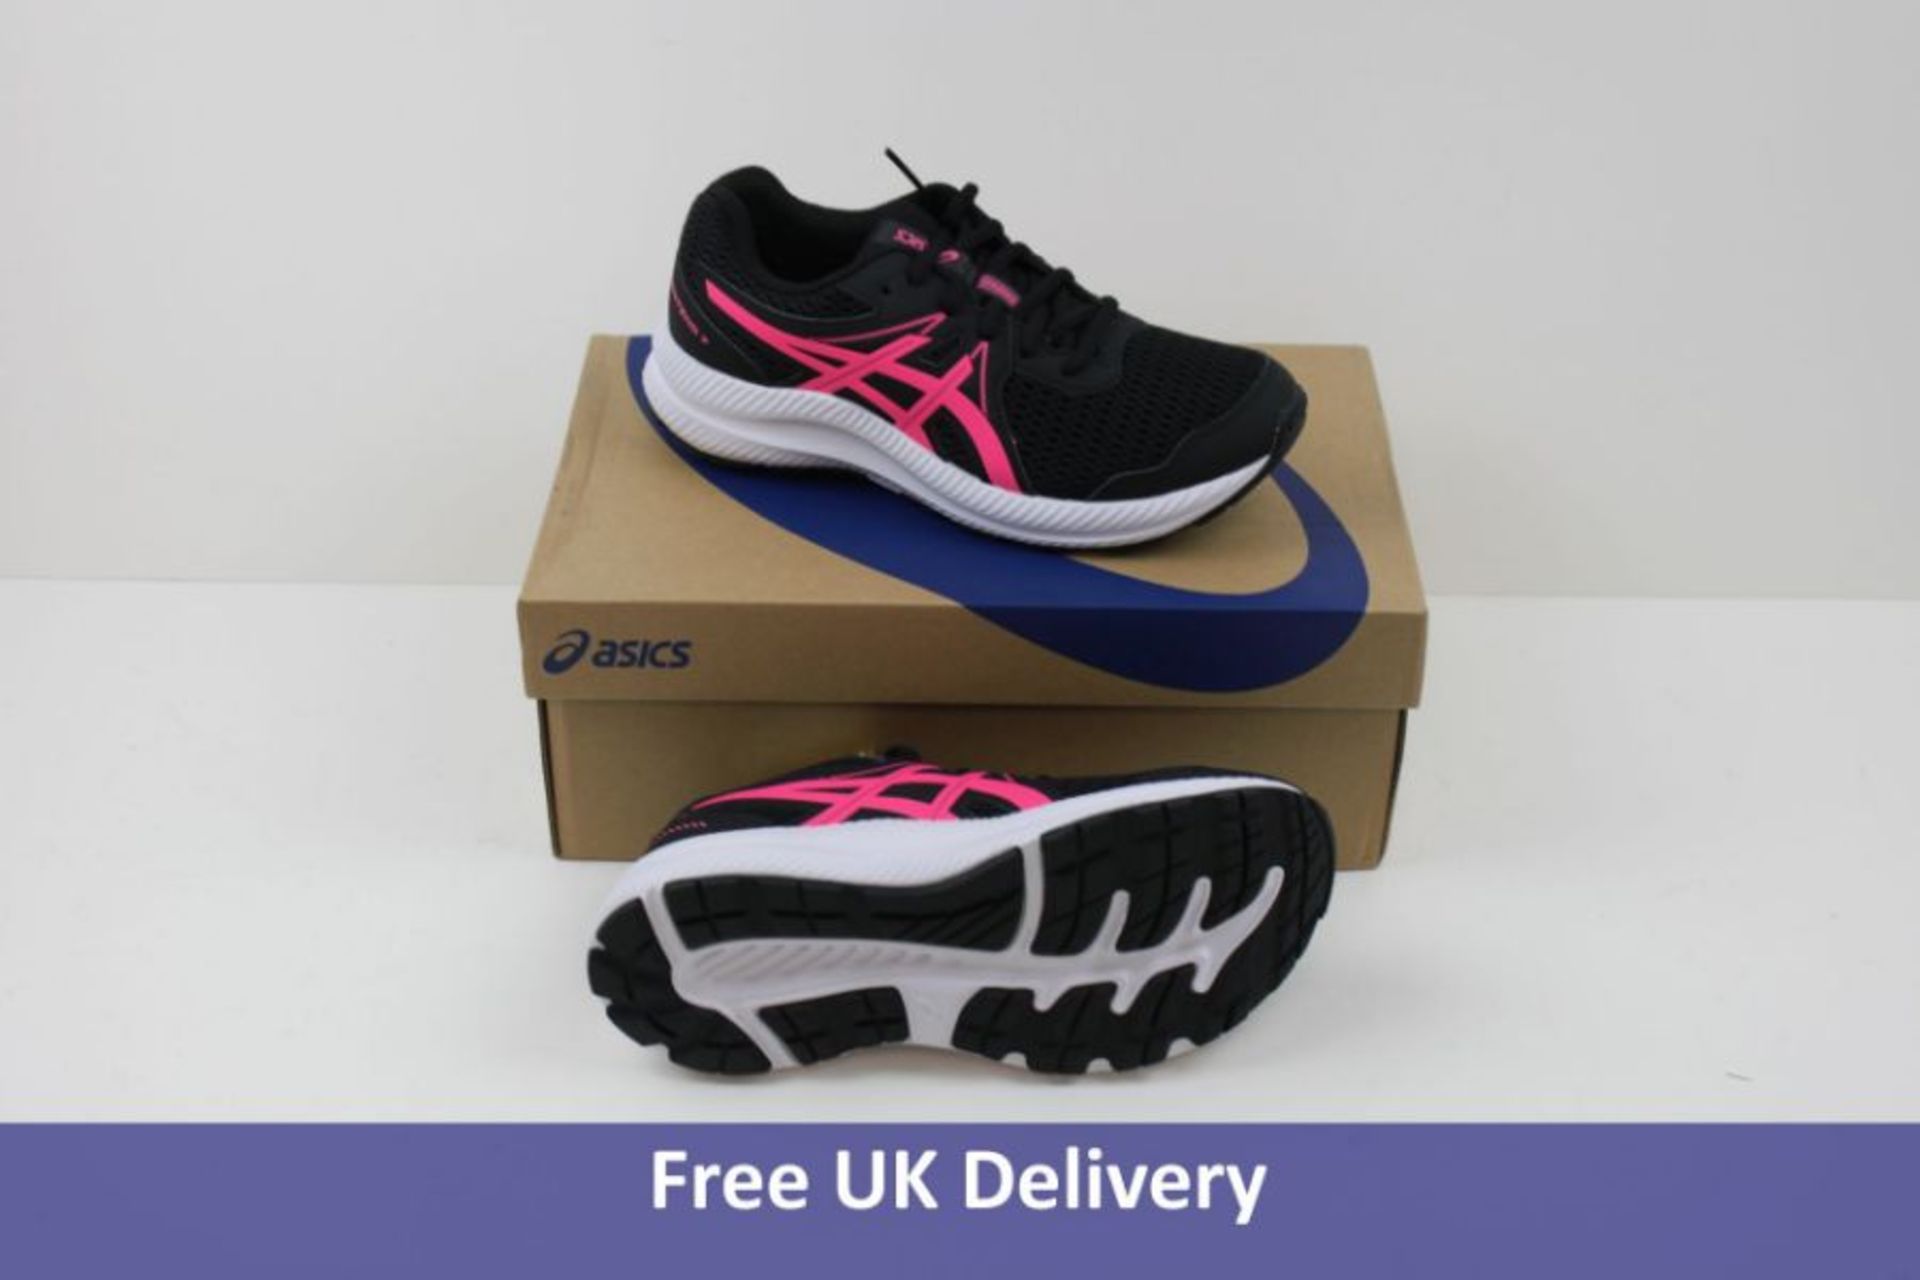 Asics Kids, Contend 7 GS Trainers, Black and Hot Pink, UK 3